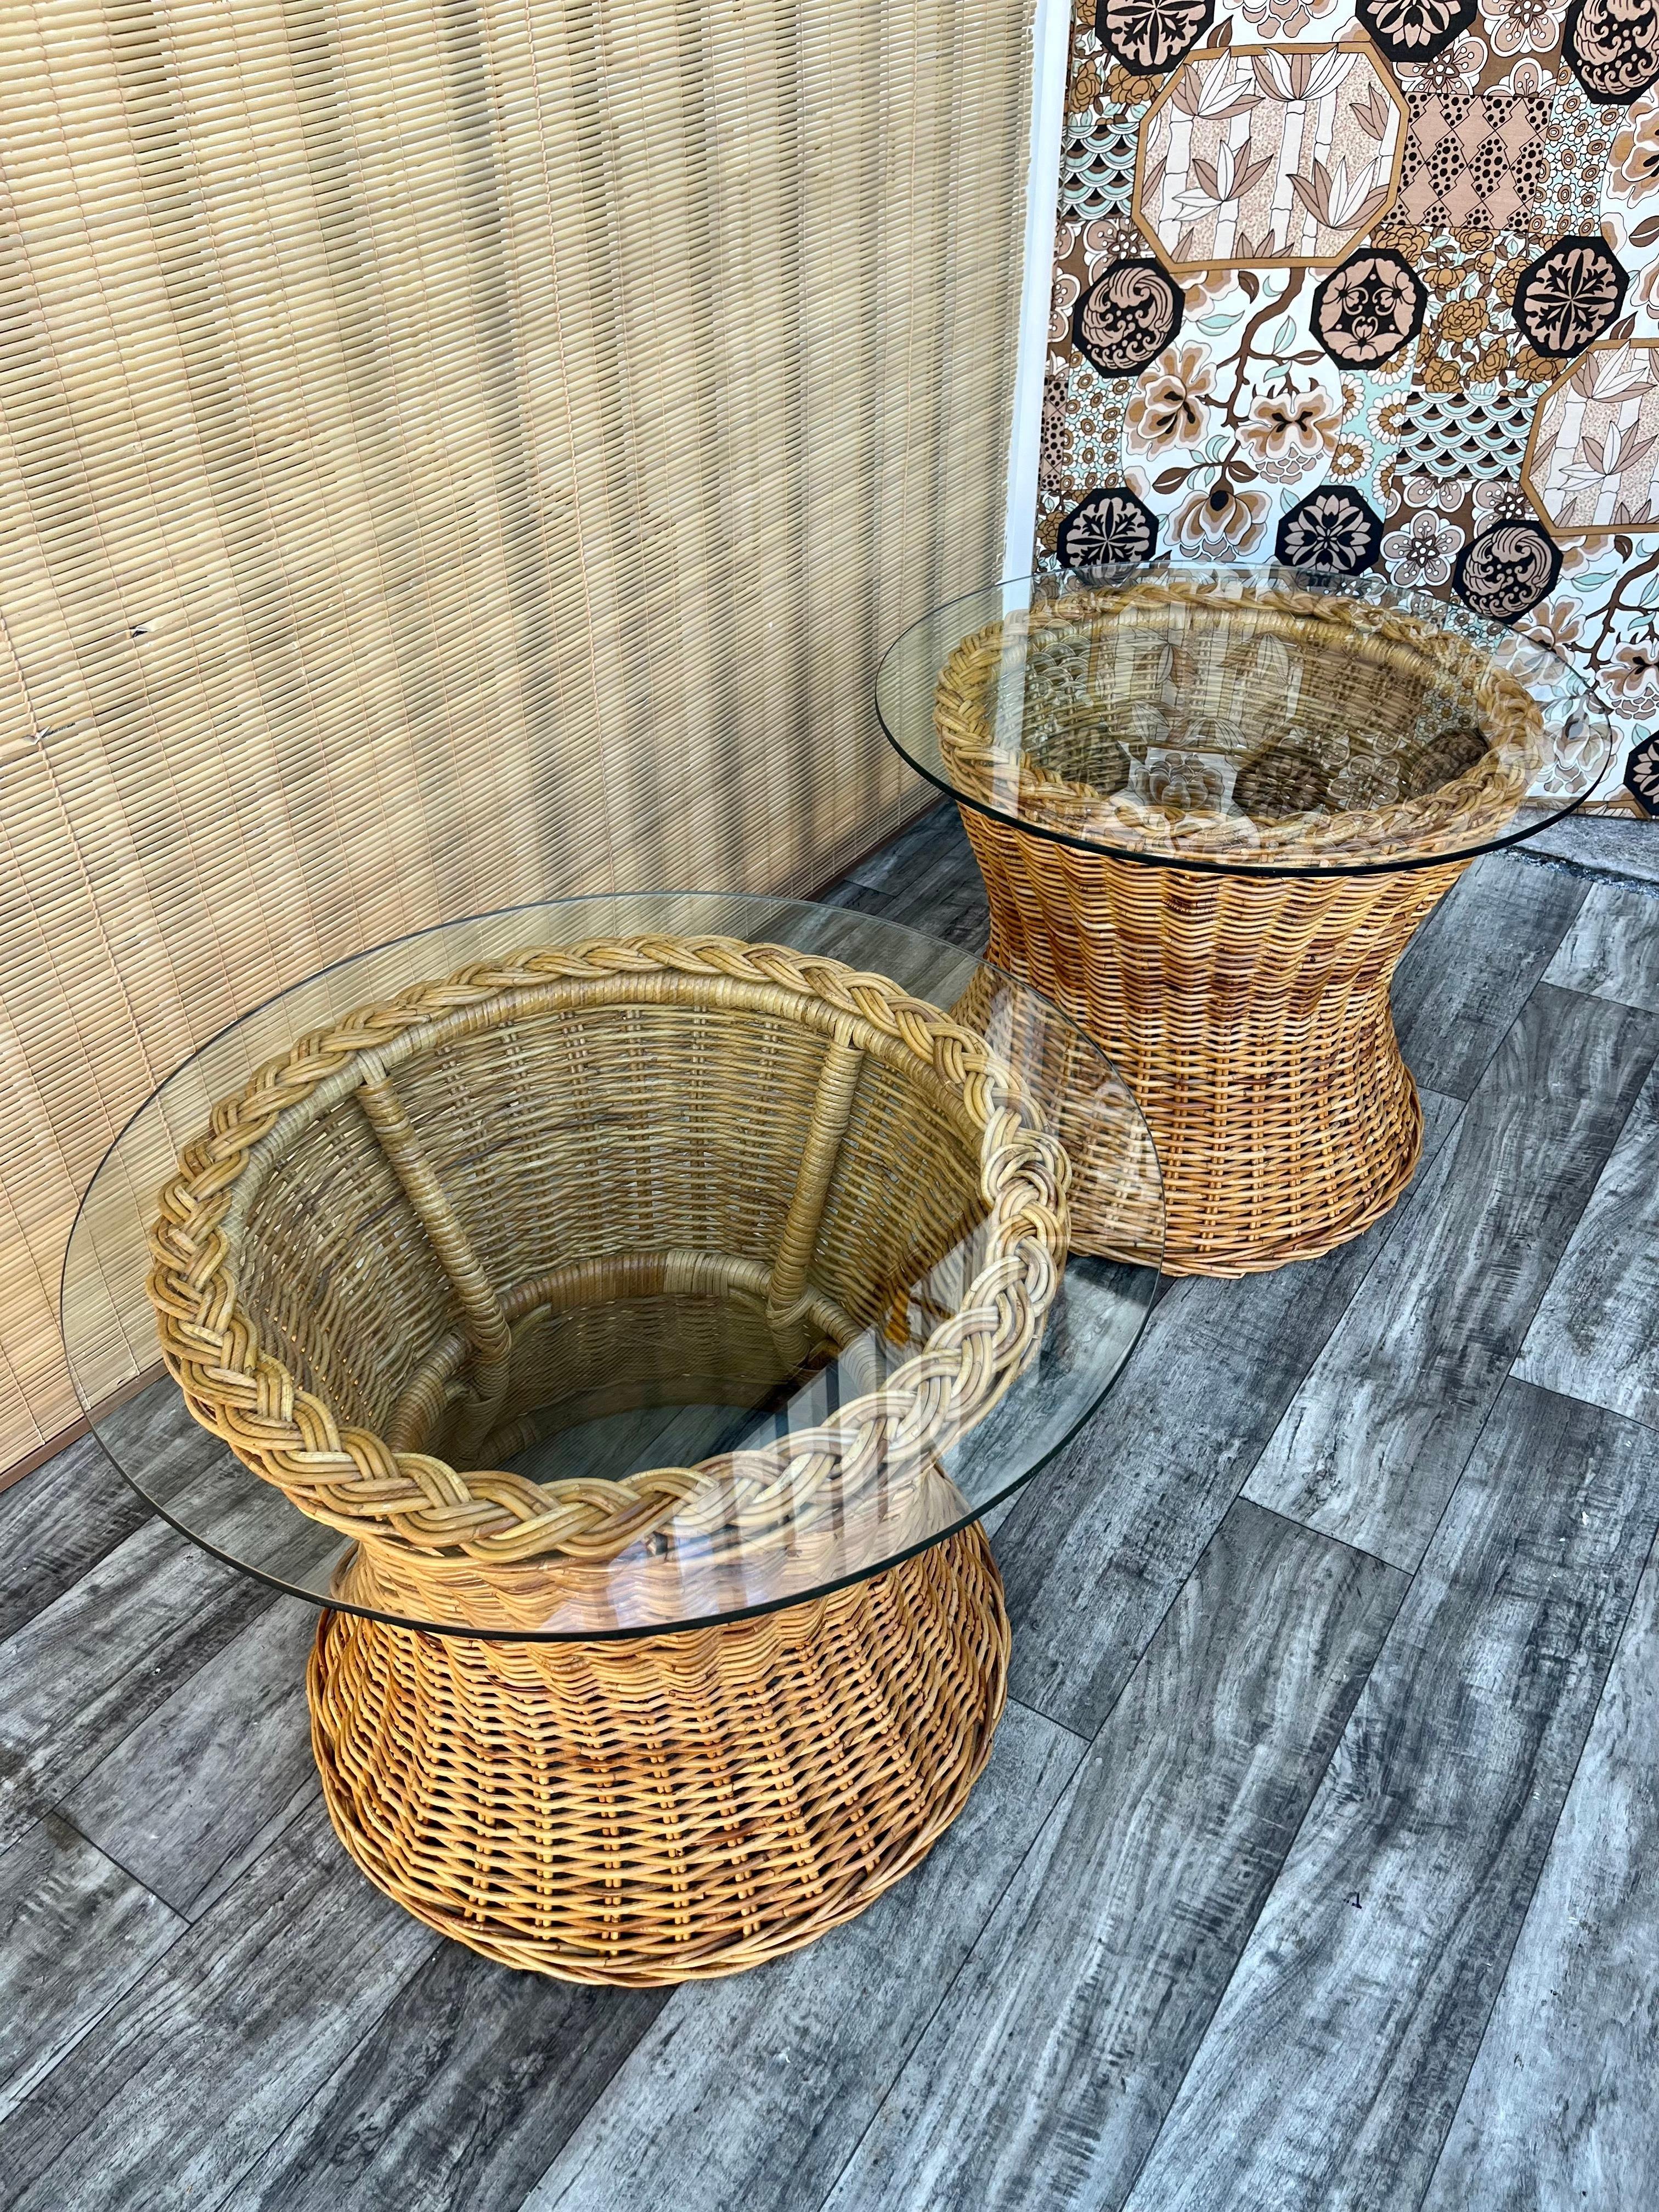 Bohemian Pair of Natural Wicker/Rattan Coastal Style Round Side Tables. Circa 1970s